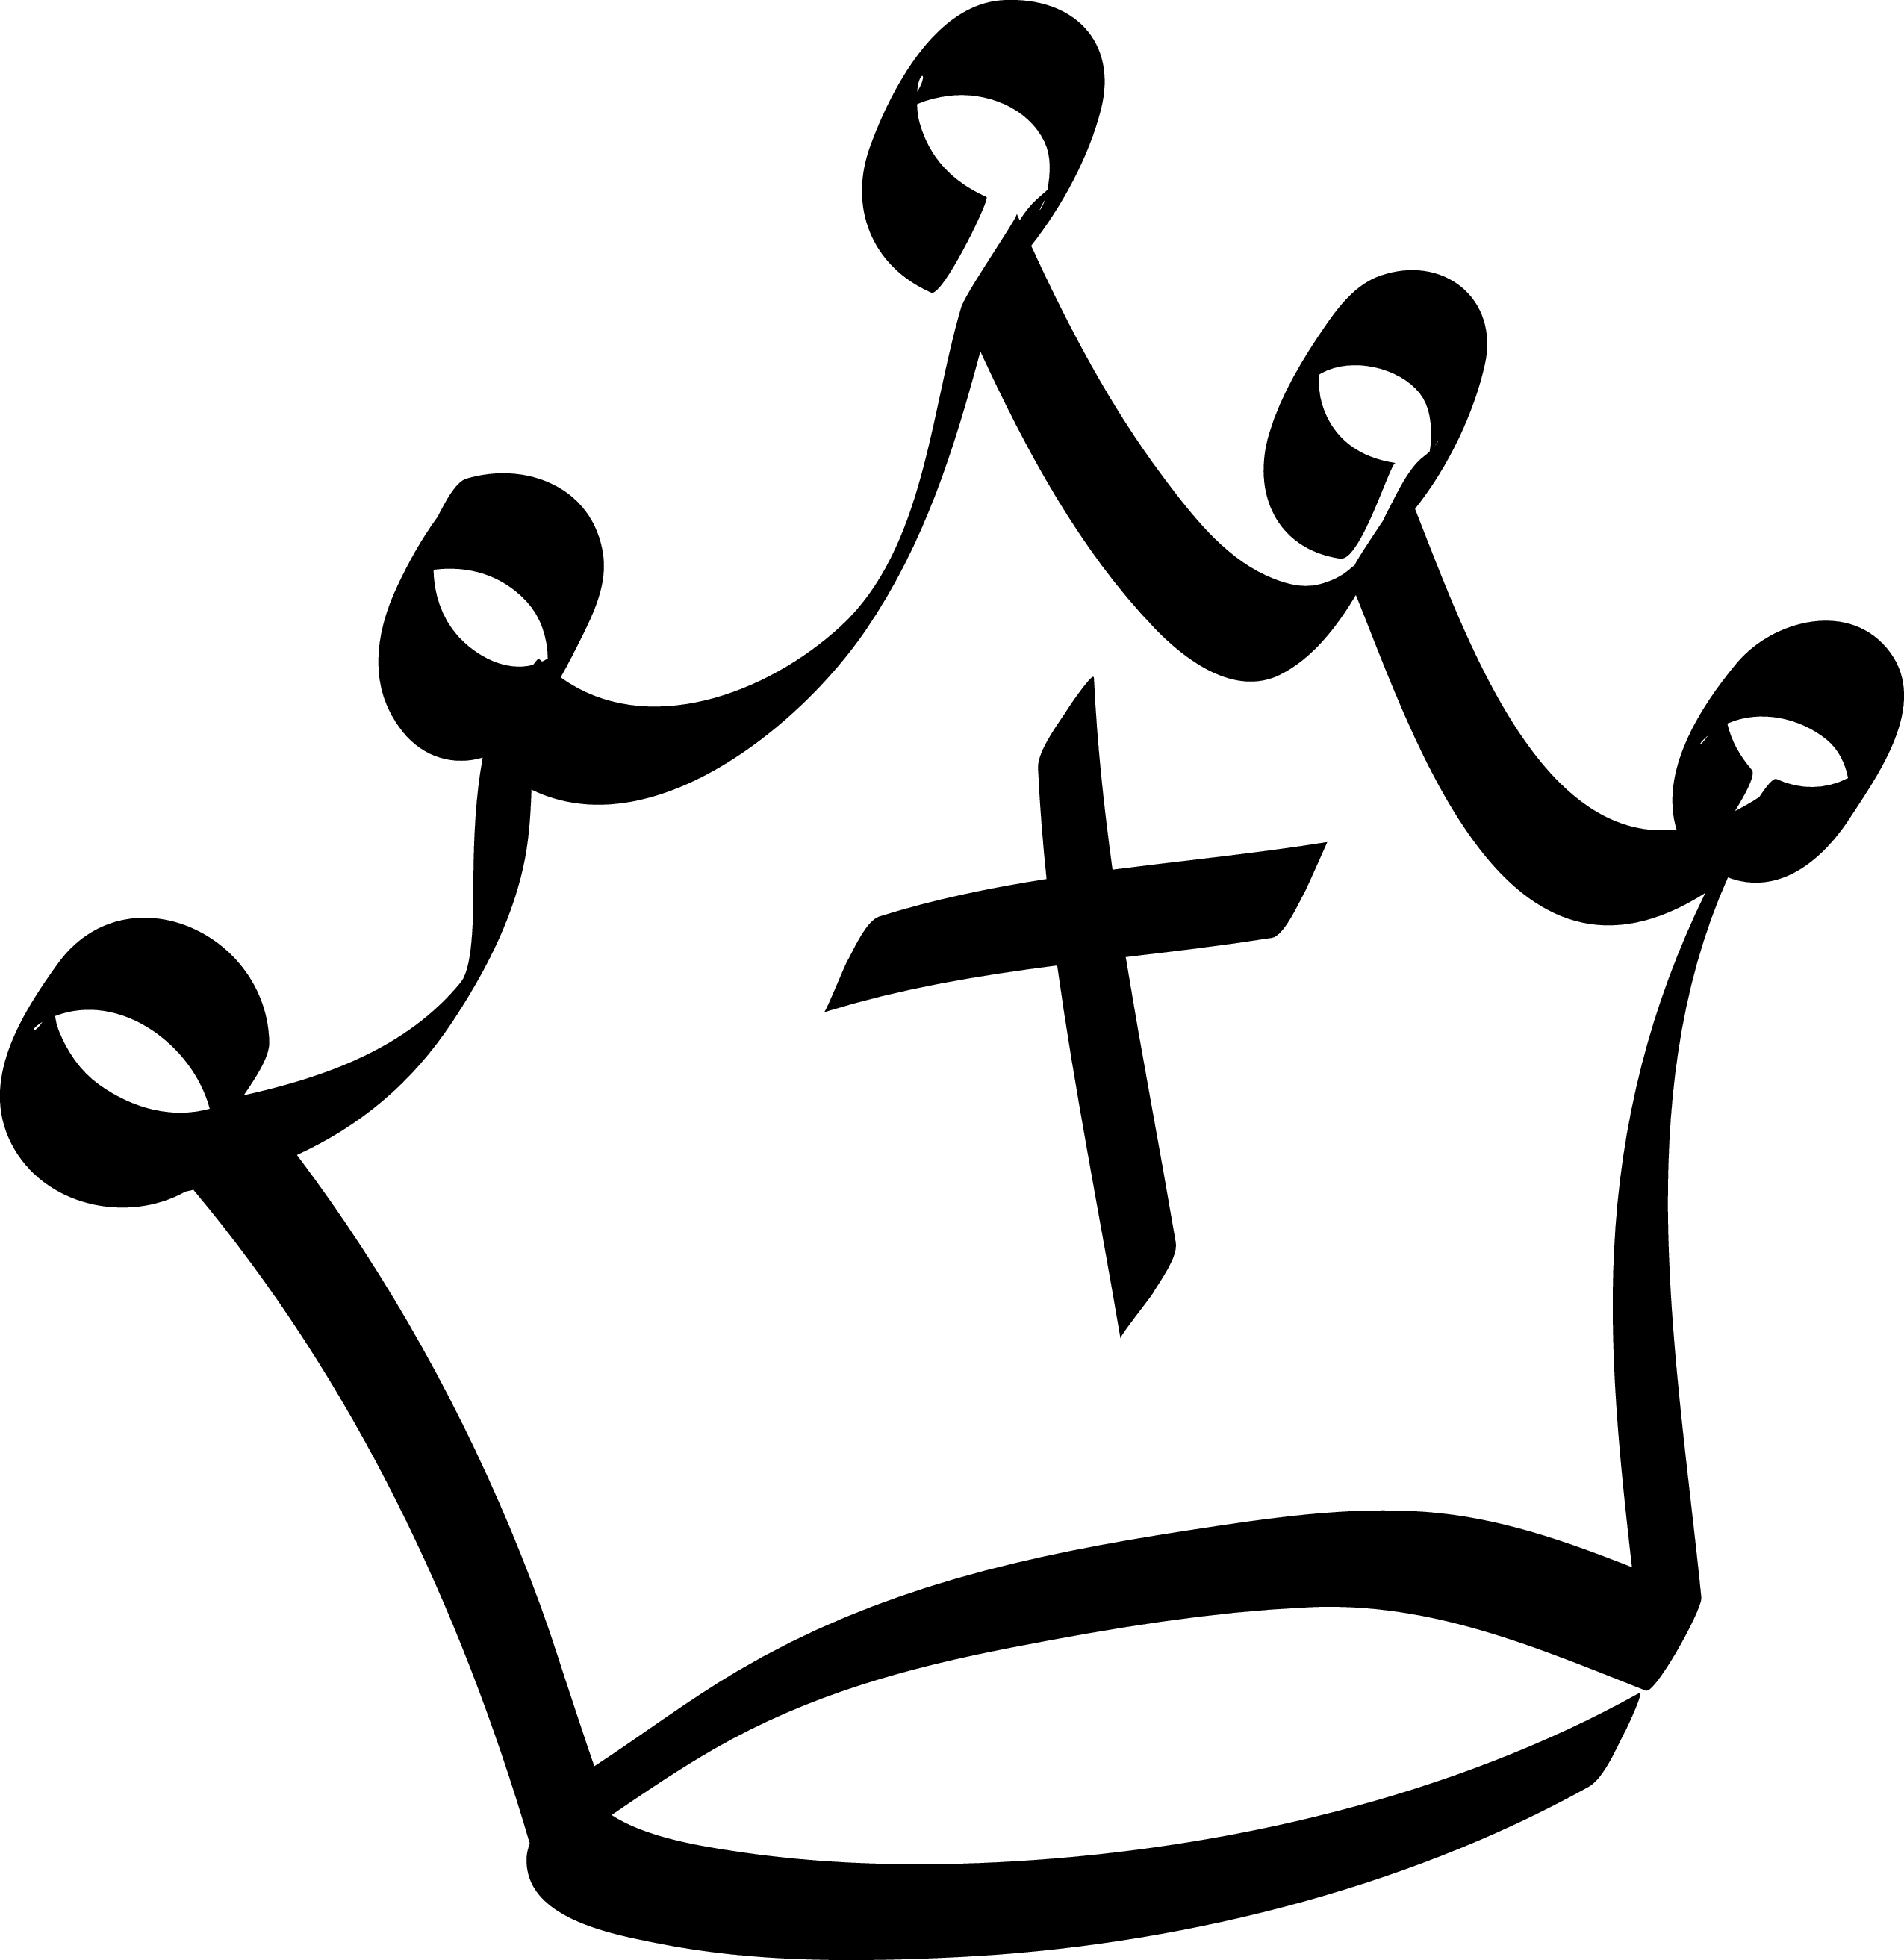 Crown Silhouette